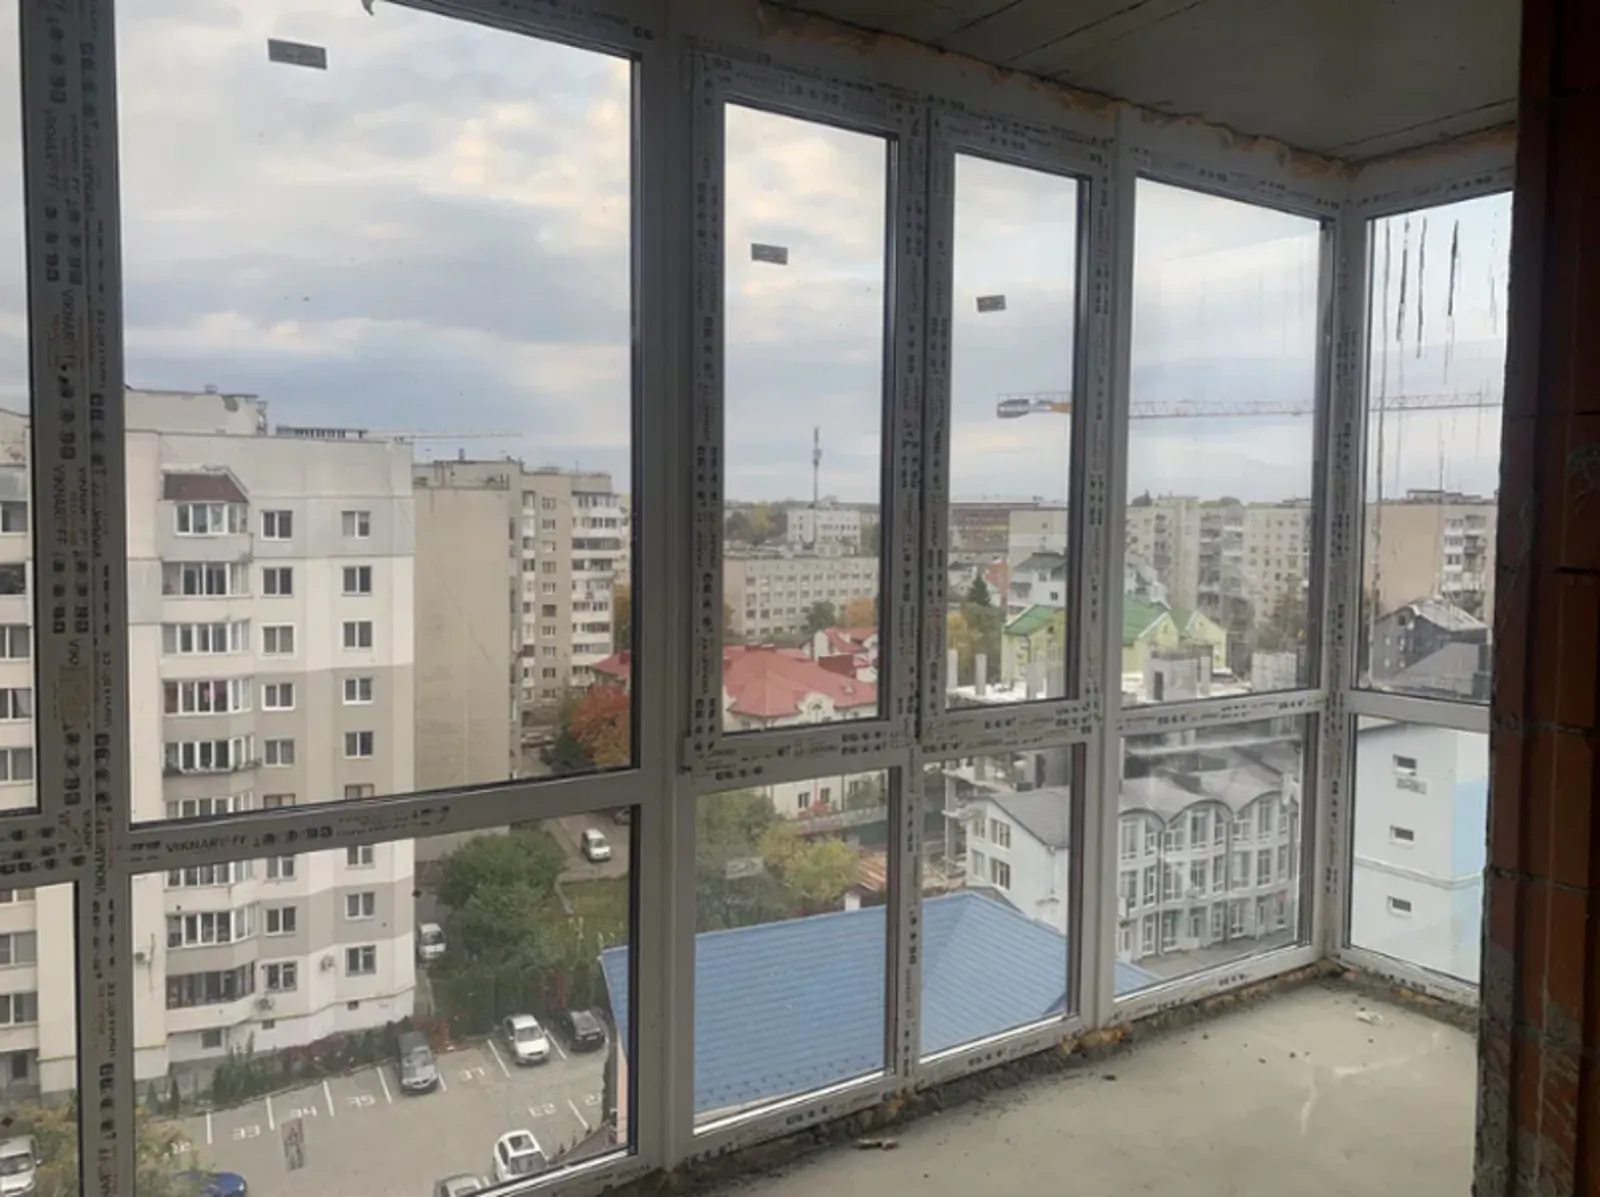 Apartments for sale. 2 rooms, 81 m², 9th floor/11 floors. Tsentr, Ternopil. 